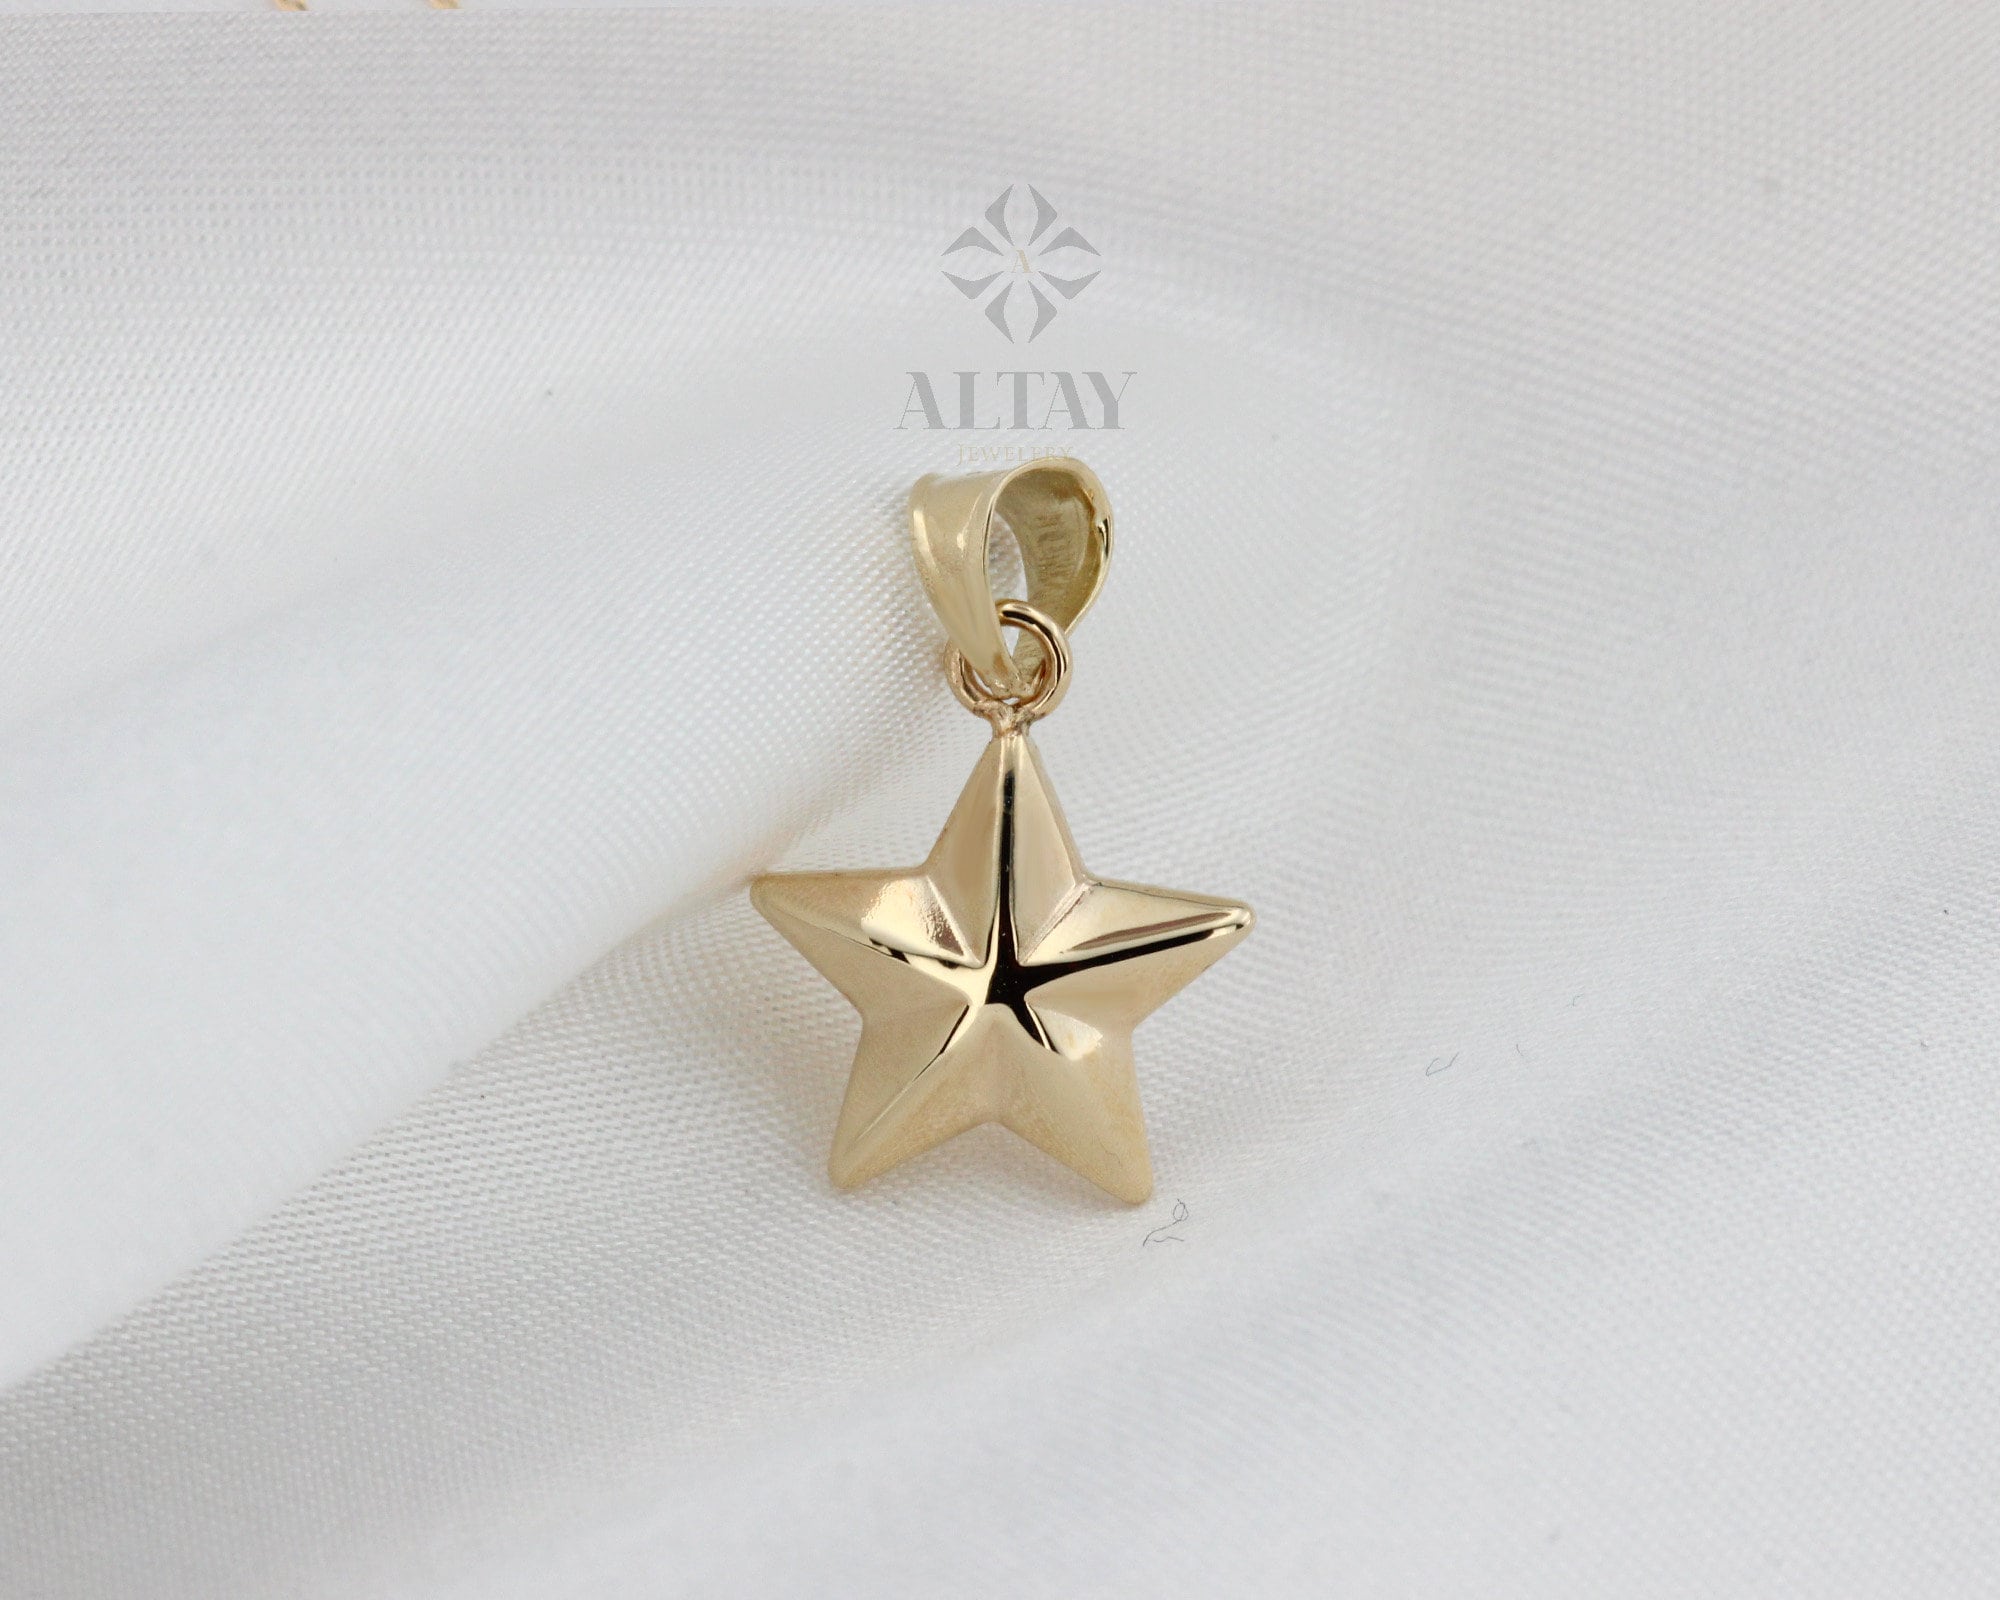 14K Gold Star Necklace, Small Star Pendant, 3D Star Charm Necklace, Stars Dainty Charm, Simple Tiny Necklace, Boho Jewelry, Gift for Her